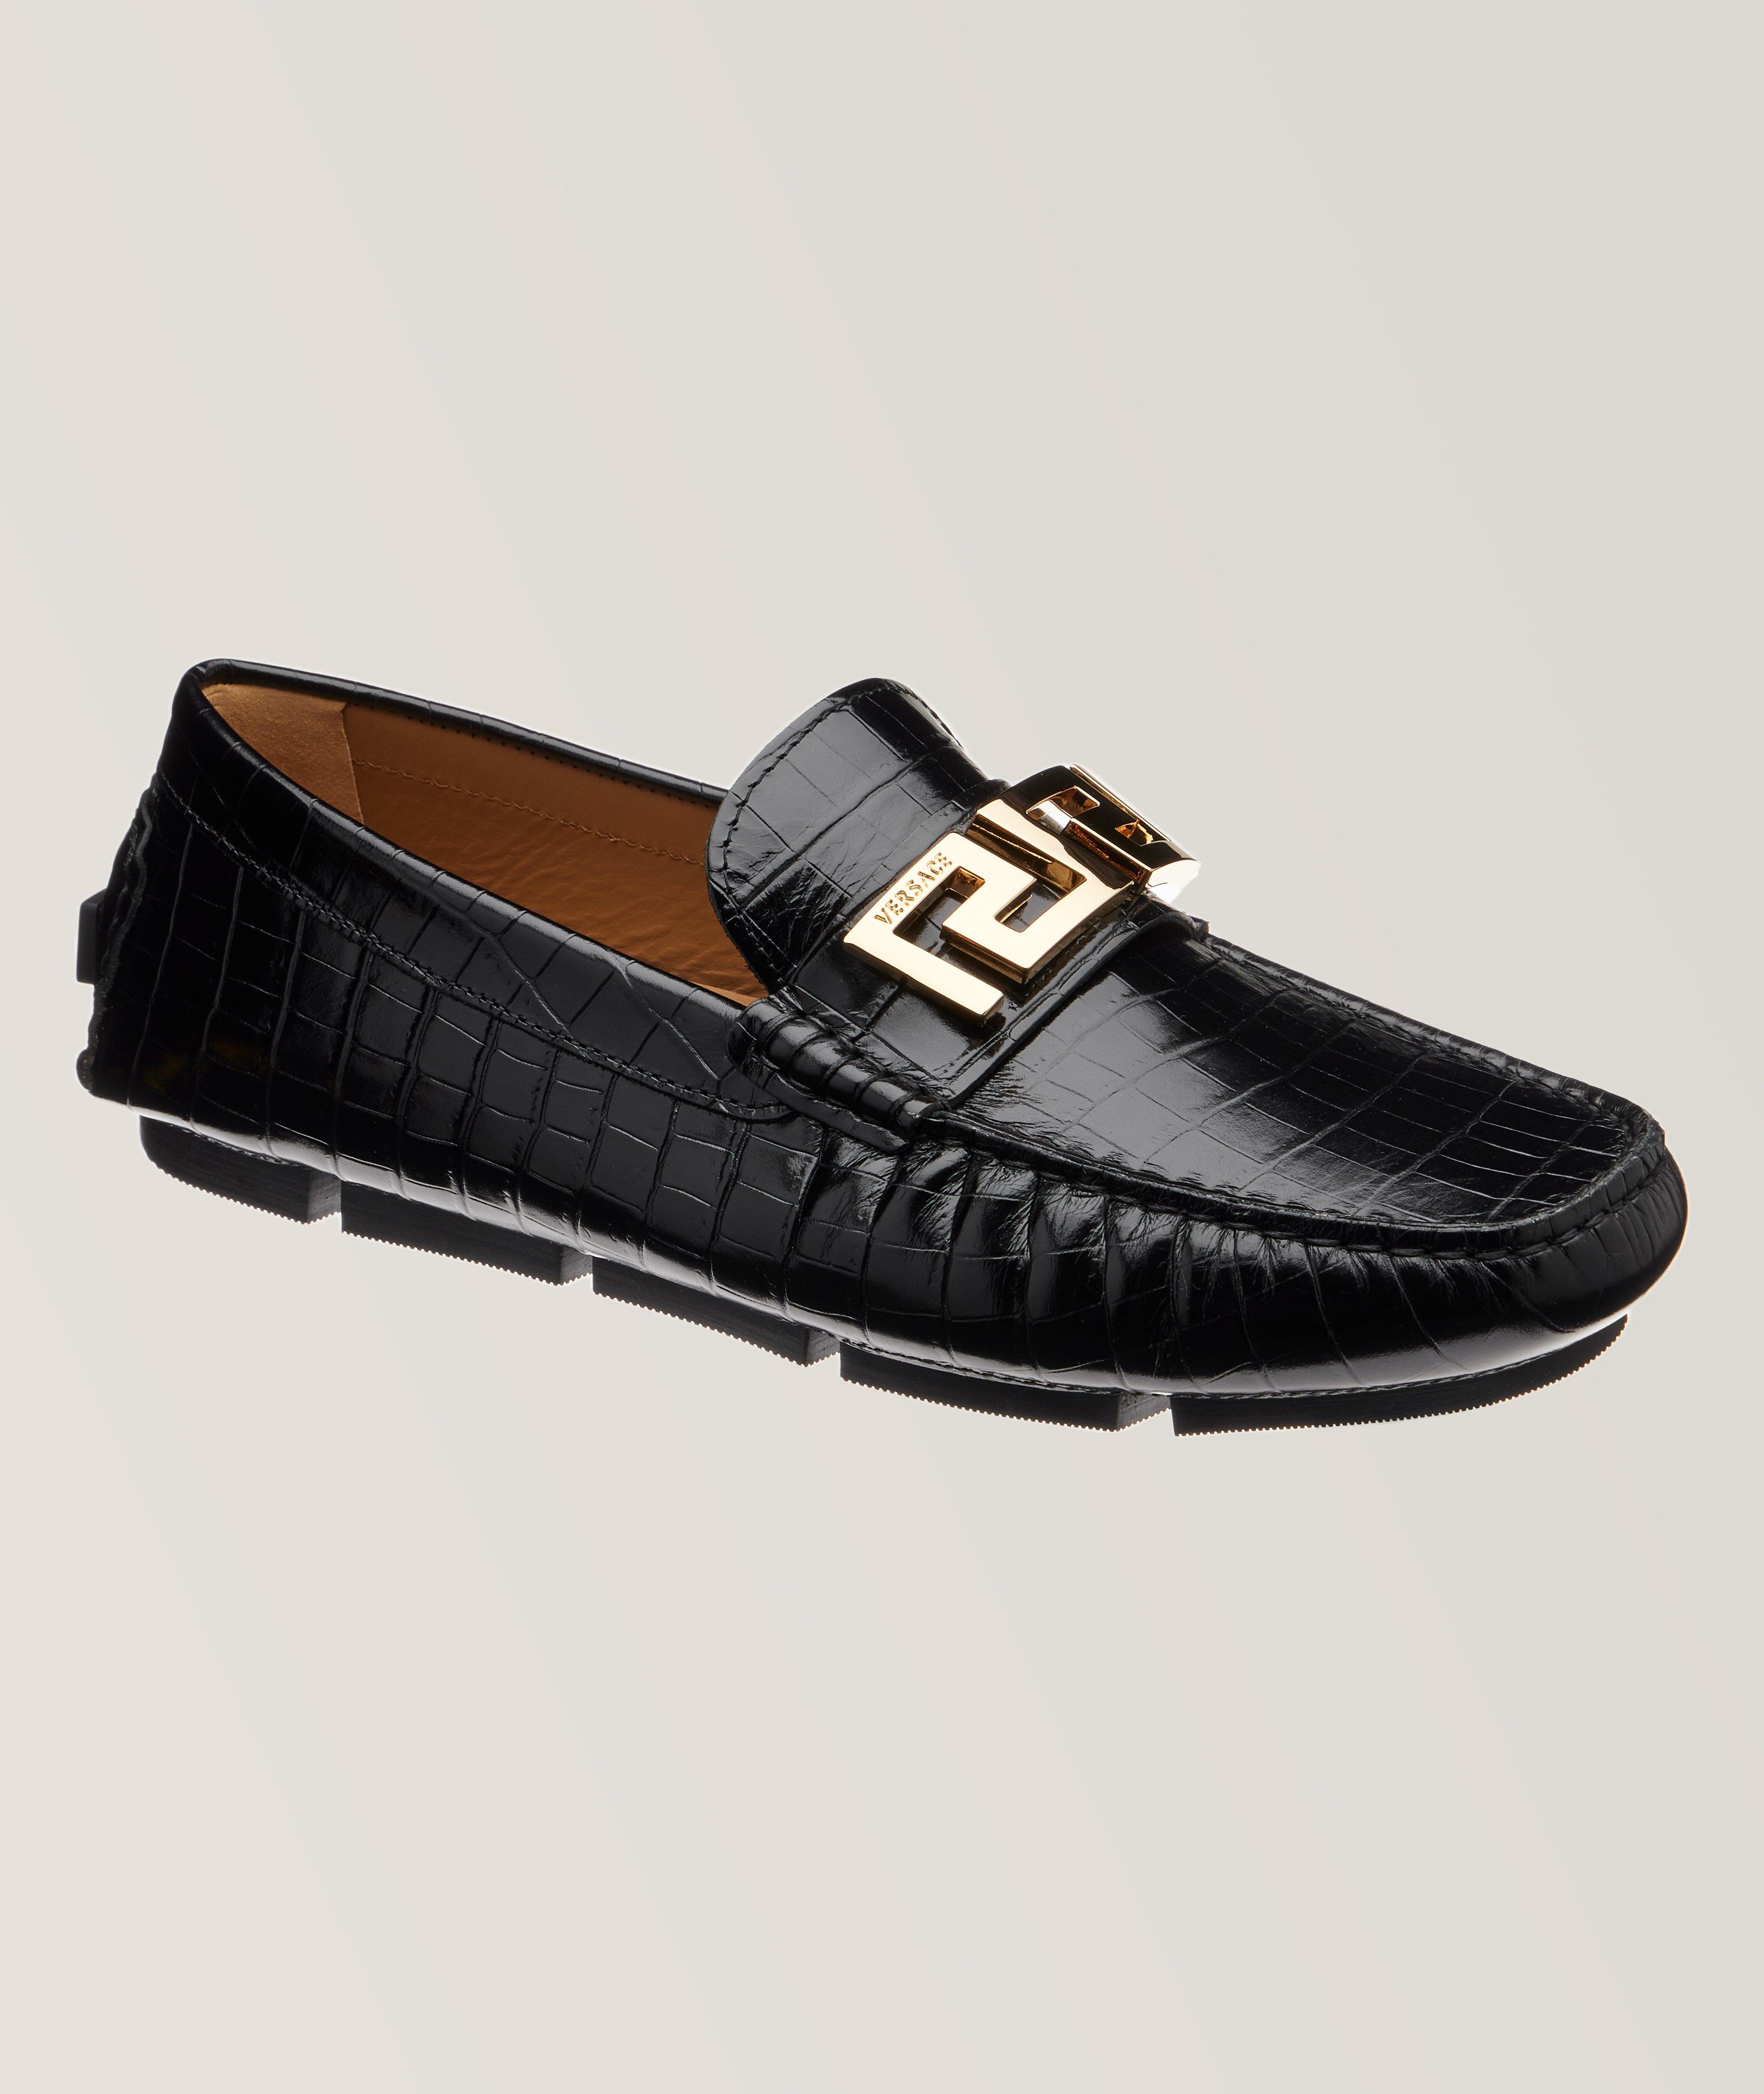 Crocodile Pattern Leather Loafers image 0